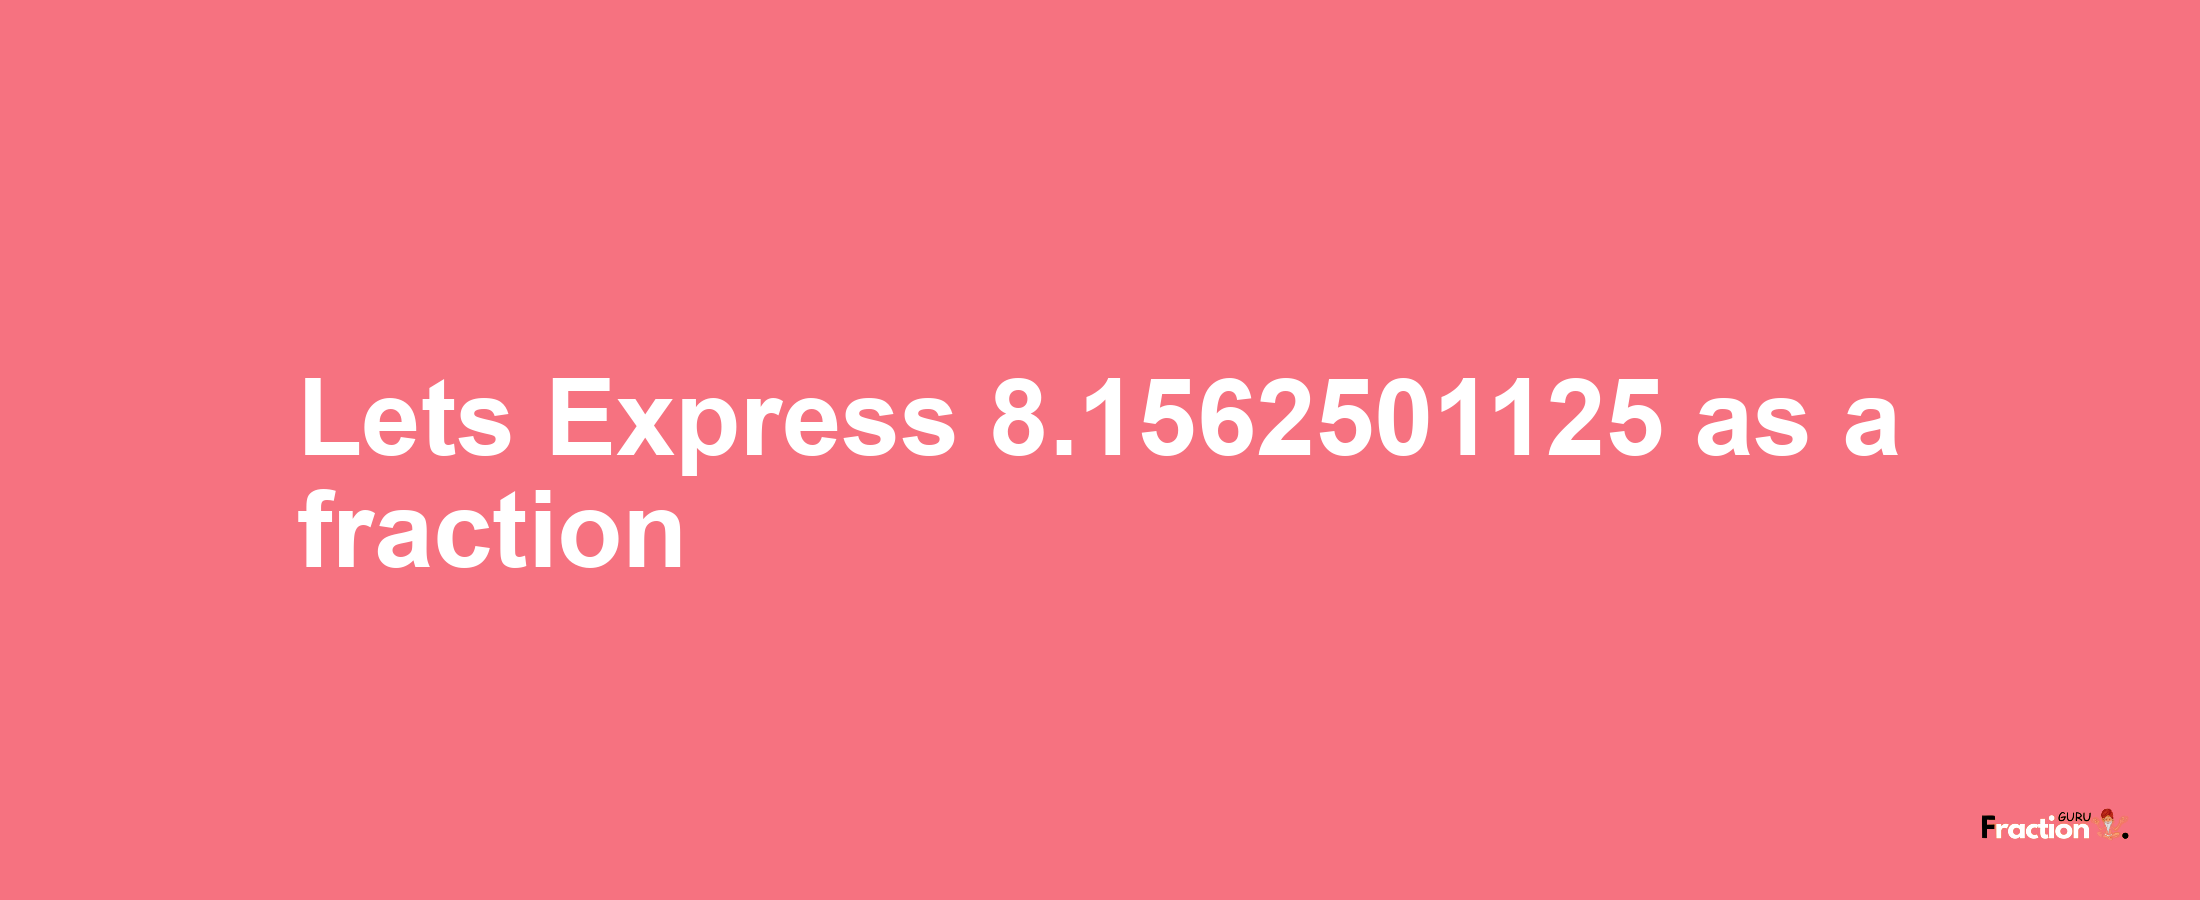 Lets Express 8.1562501125 as afraction